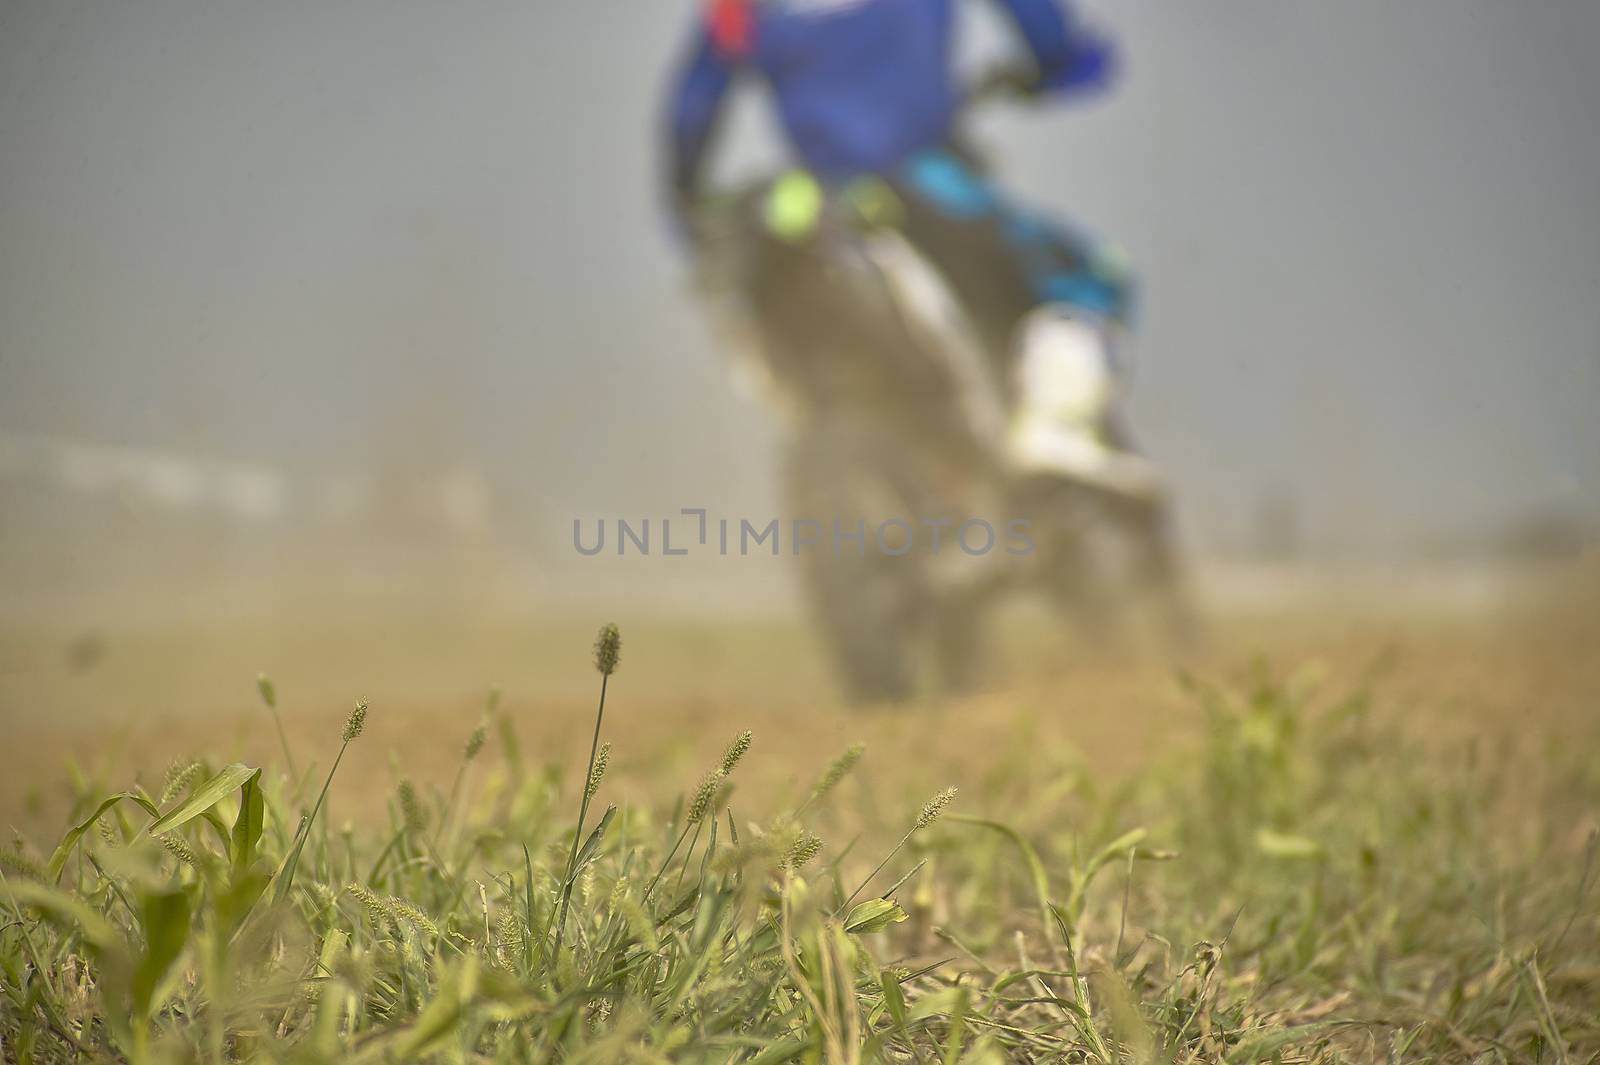 GAVELLO, ITALY 24 MARCH 2020: Enduro race in Countryside